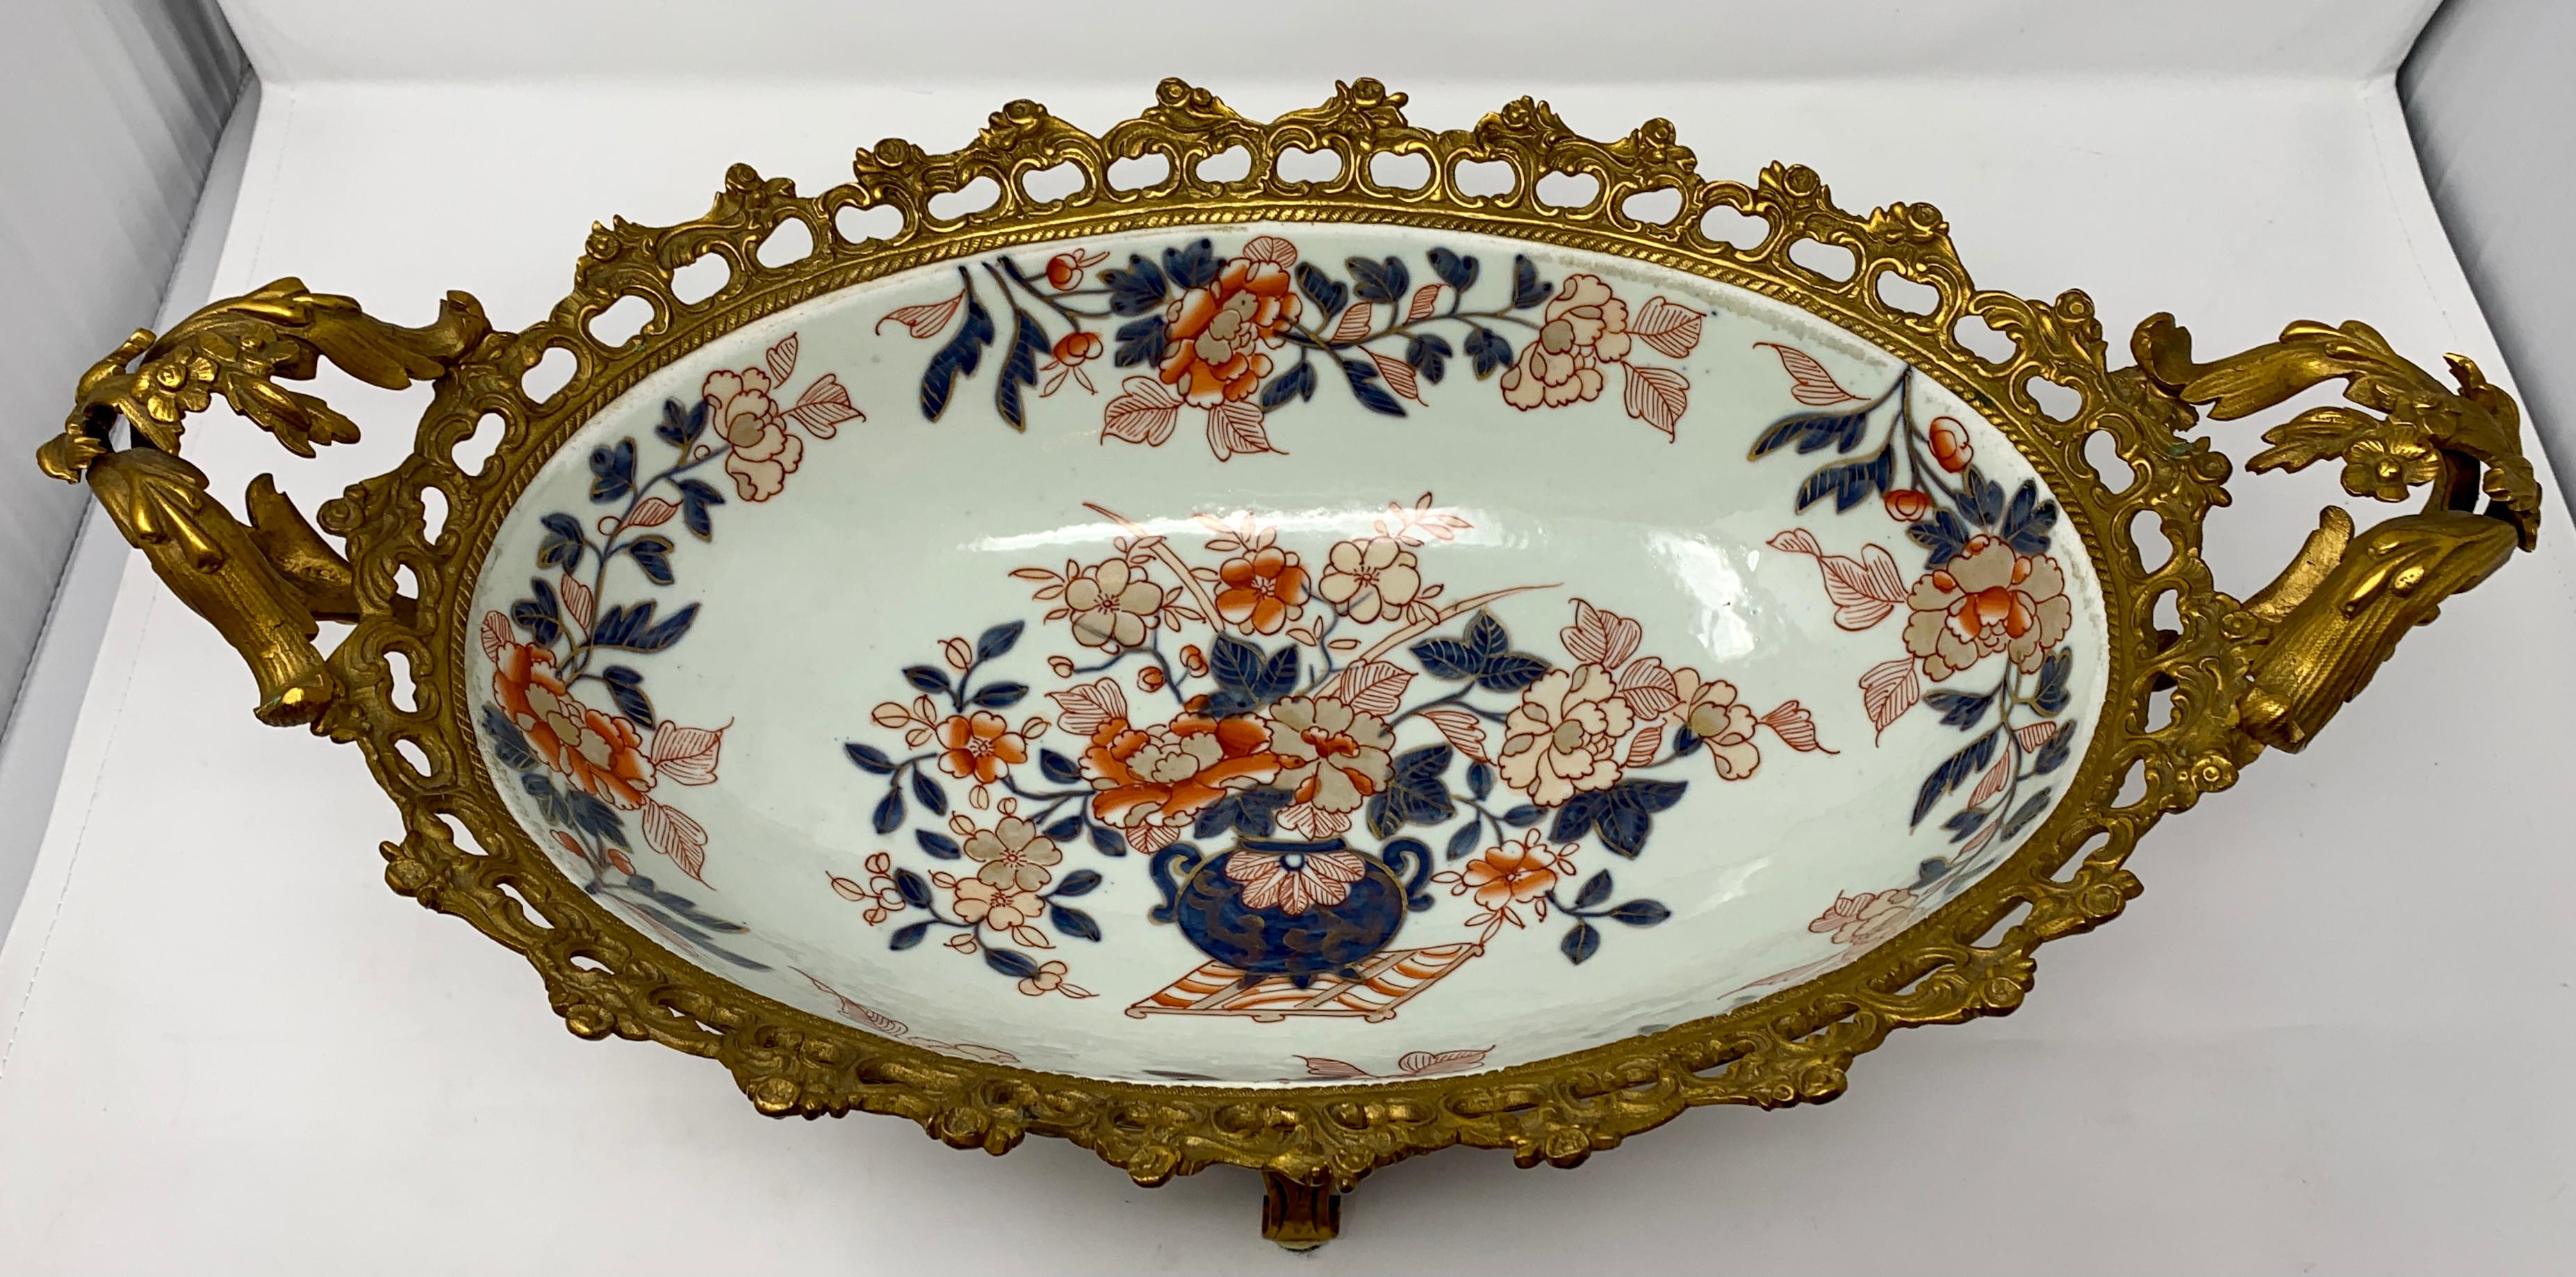 Antique 19th Century Japanese Imari Porcelain Centerpiece with Ormolu Mounts In Good Condition For Sale In New Orleans, LA